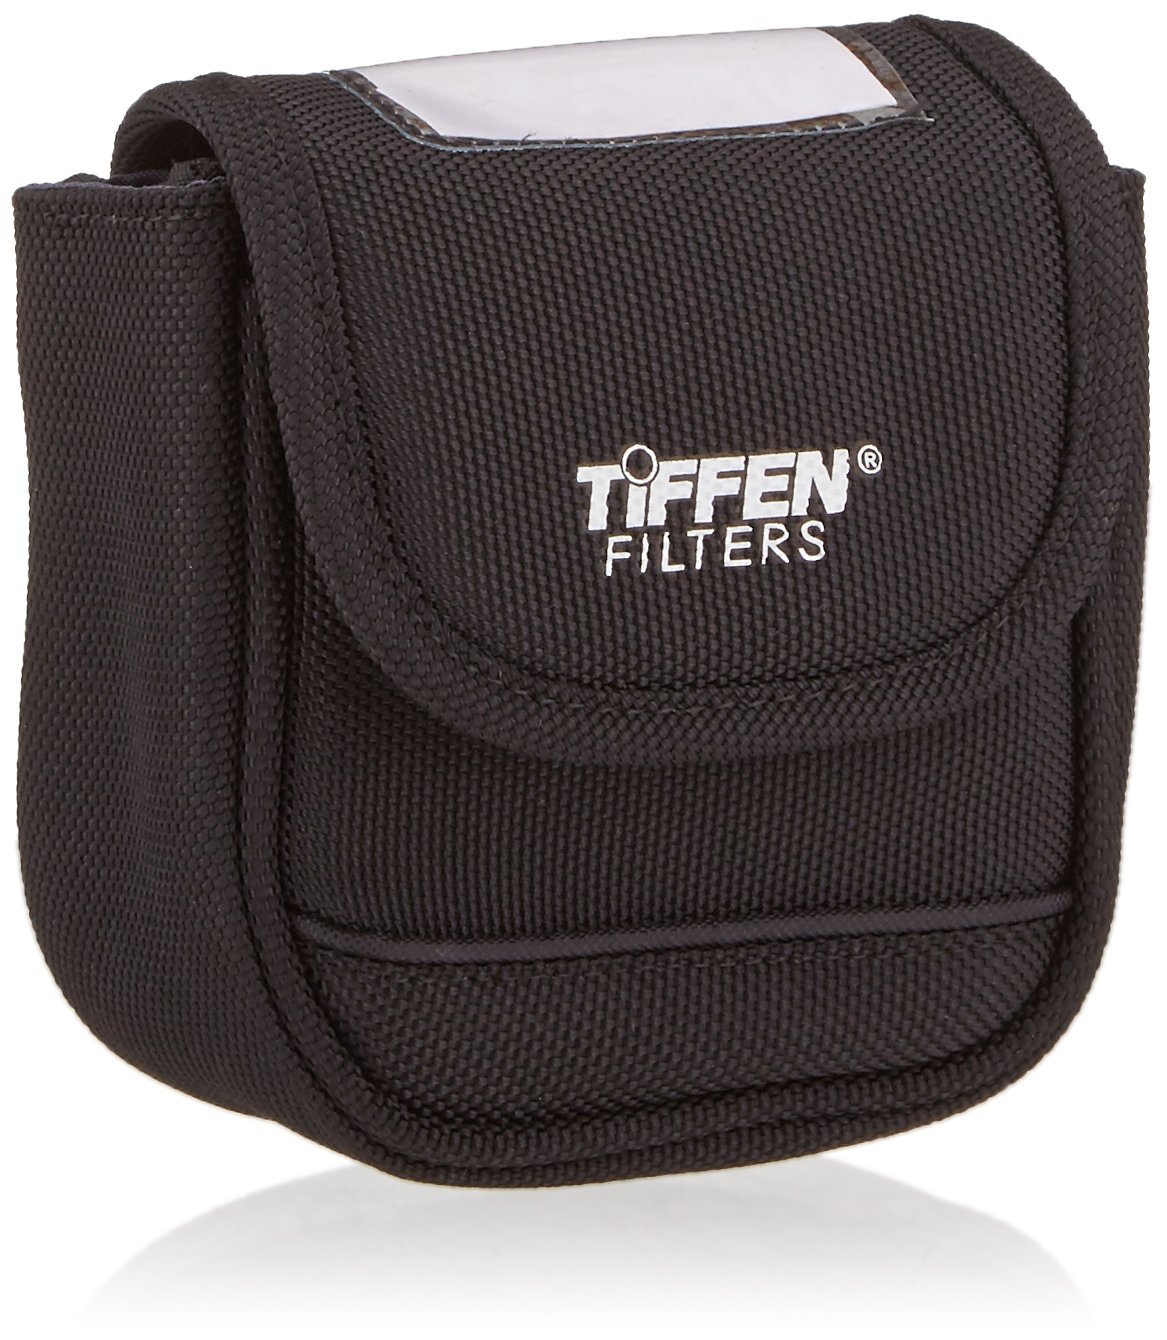 Tiffen 4BLTPCHLGK Large Belt Style Filter Pouch for Filters 62mm to 82mm,Black